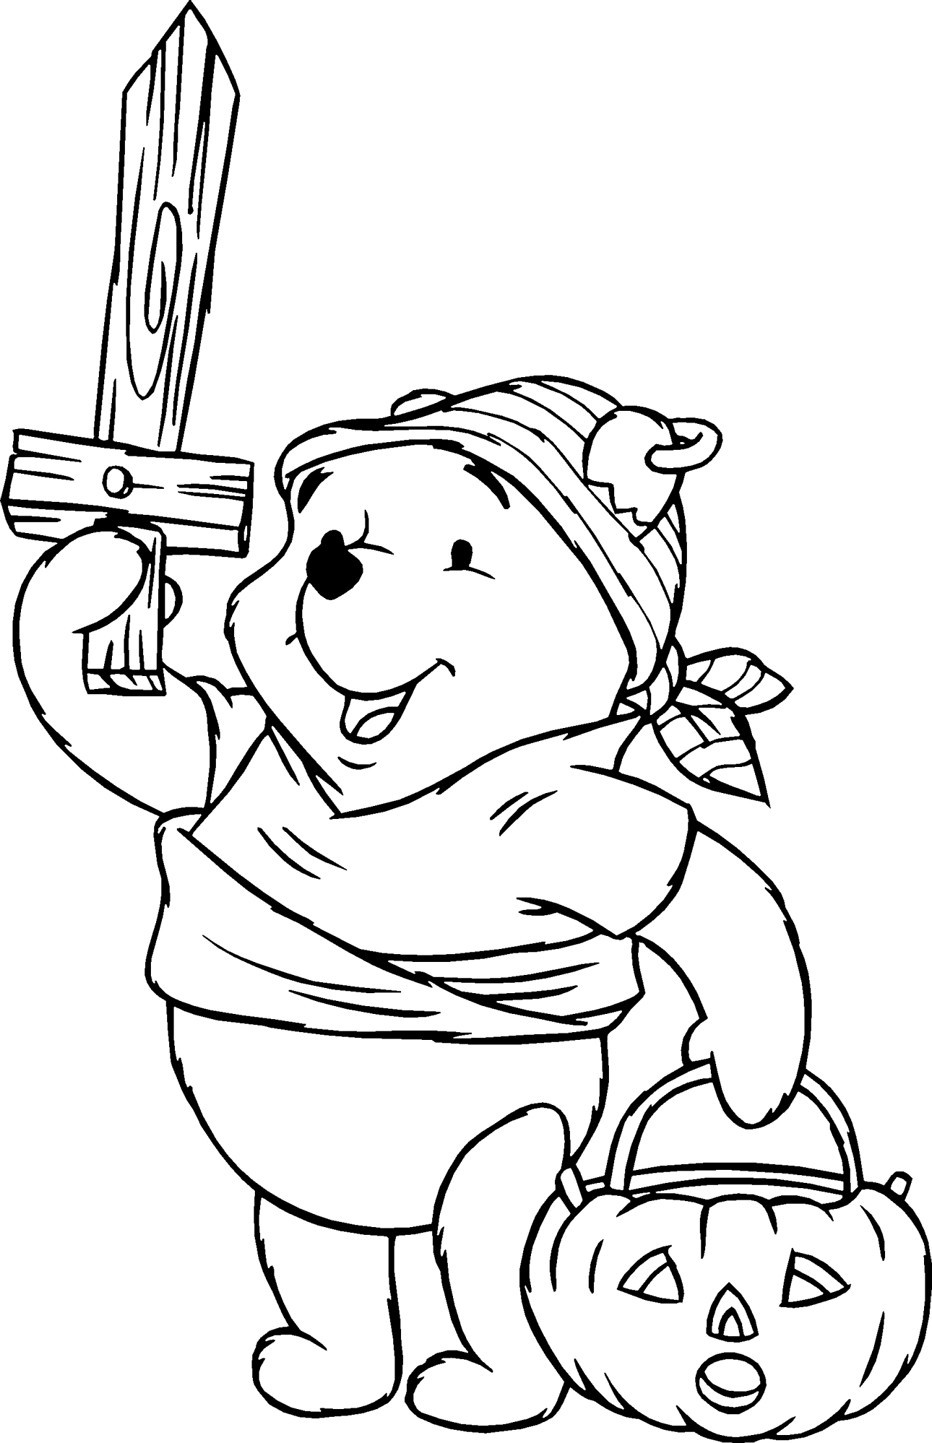 Printable Coloring Pages Kids
 24 Free Printable Halloween Coloring Pages for Kids